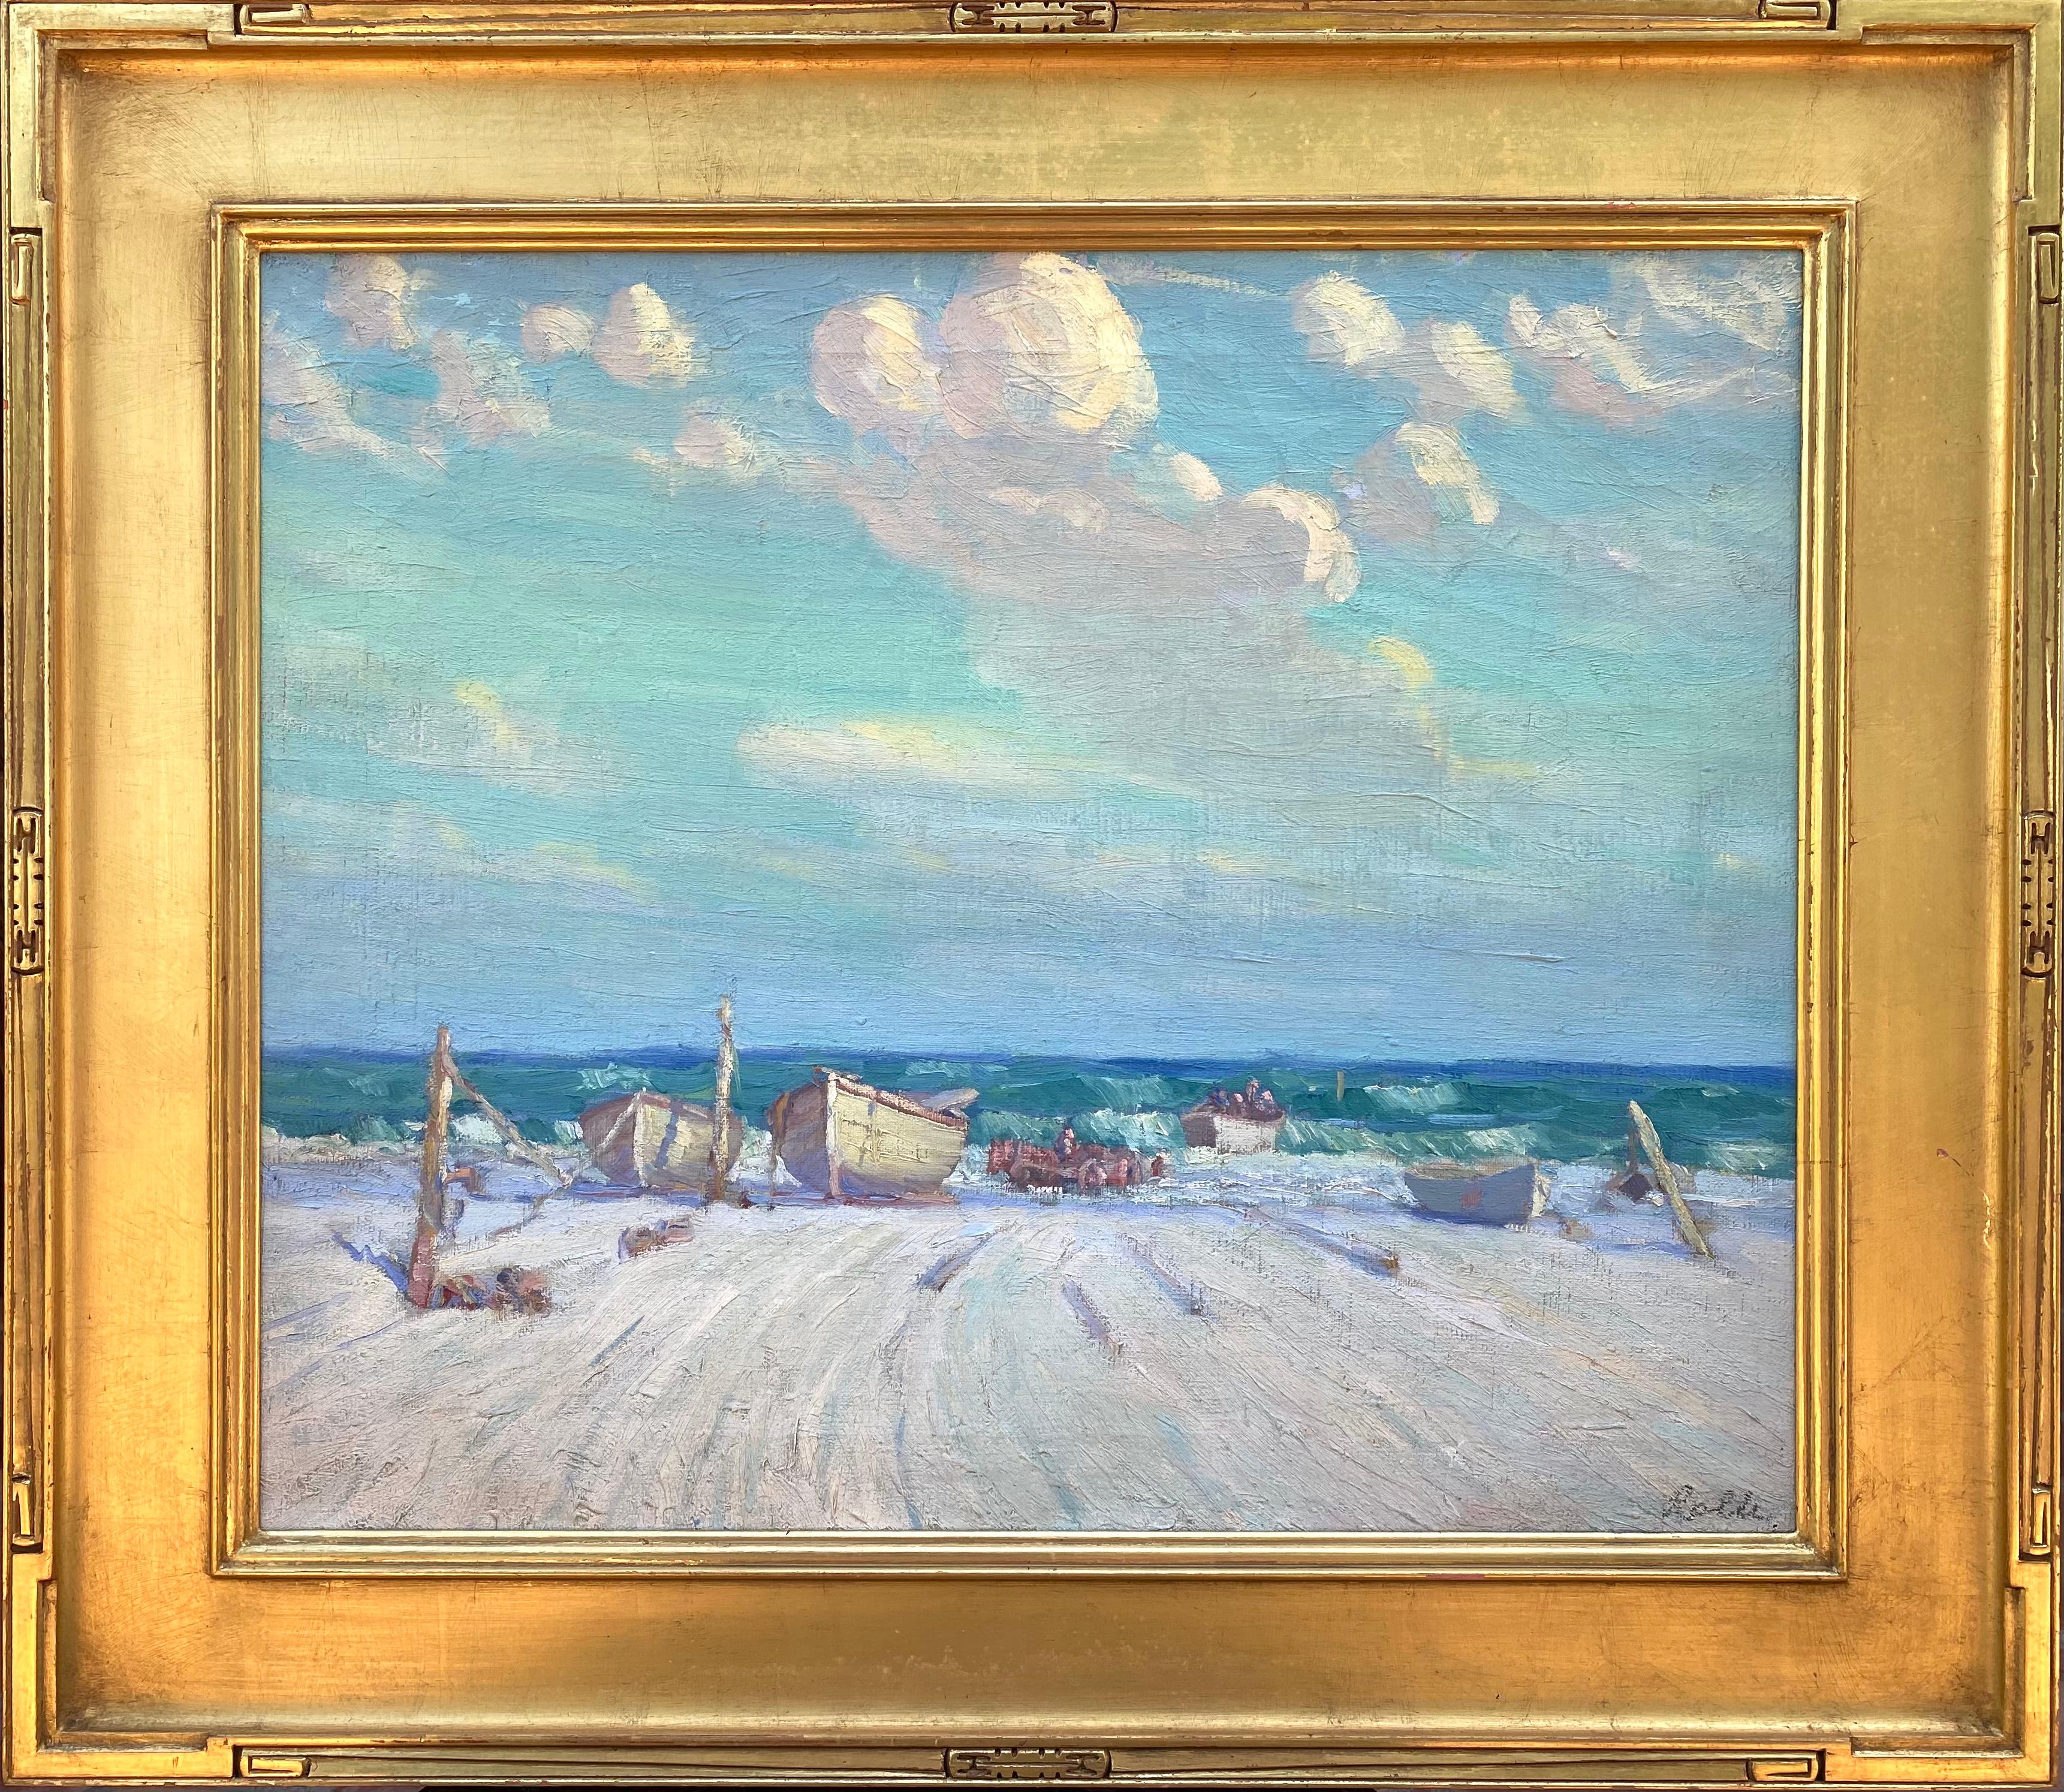 “Looking out to Sea” - Painting by August H.O. Rolle